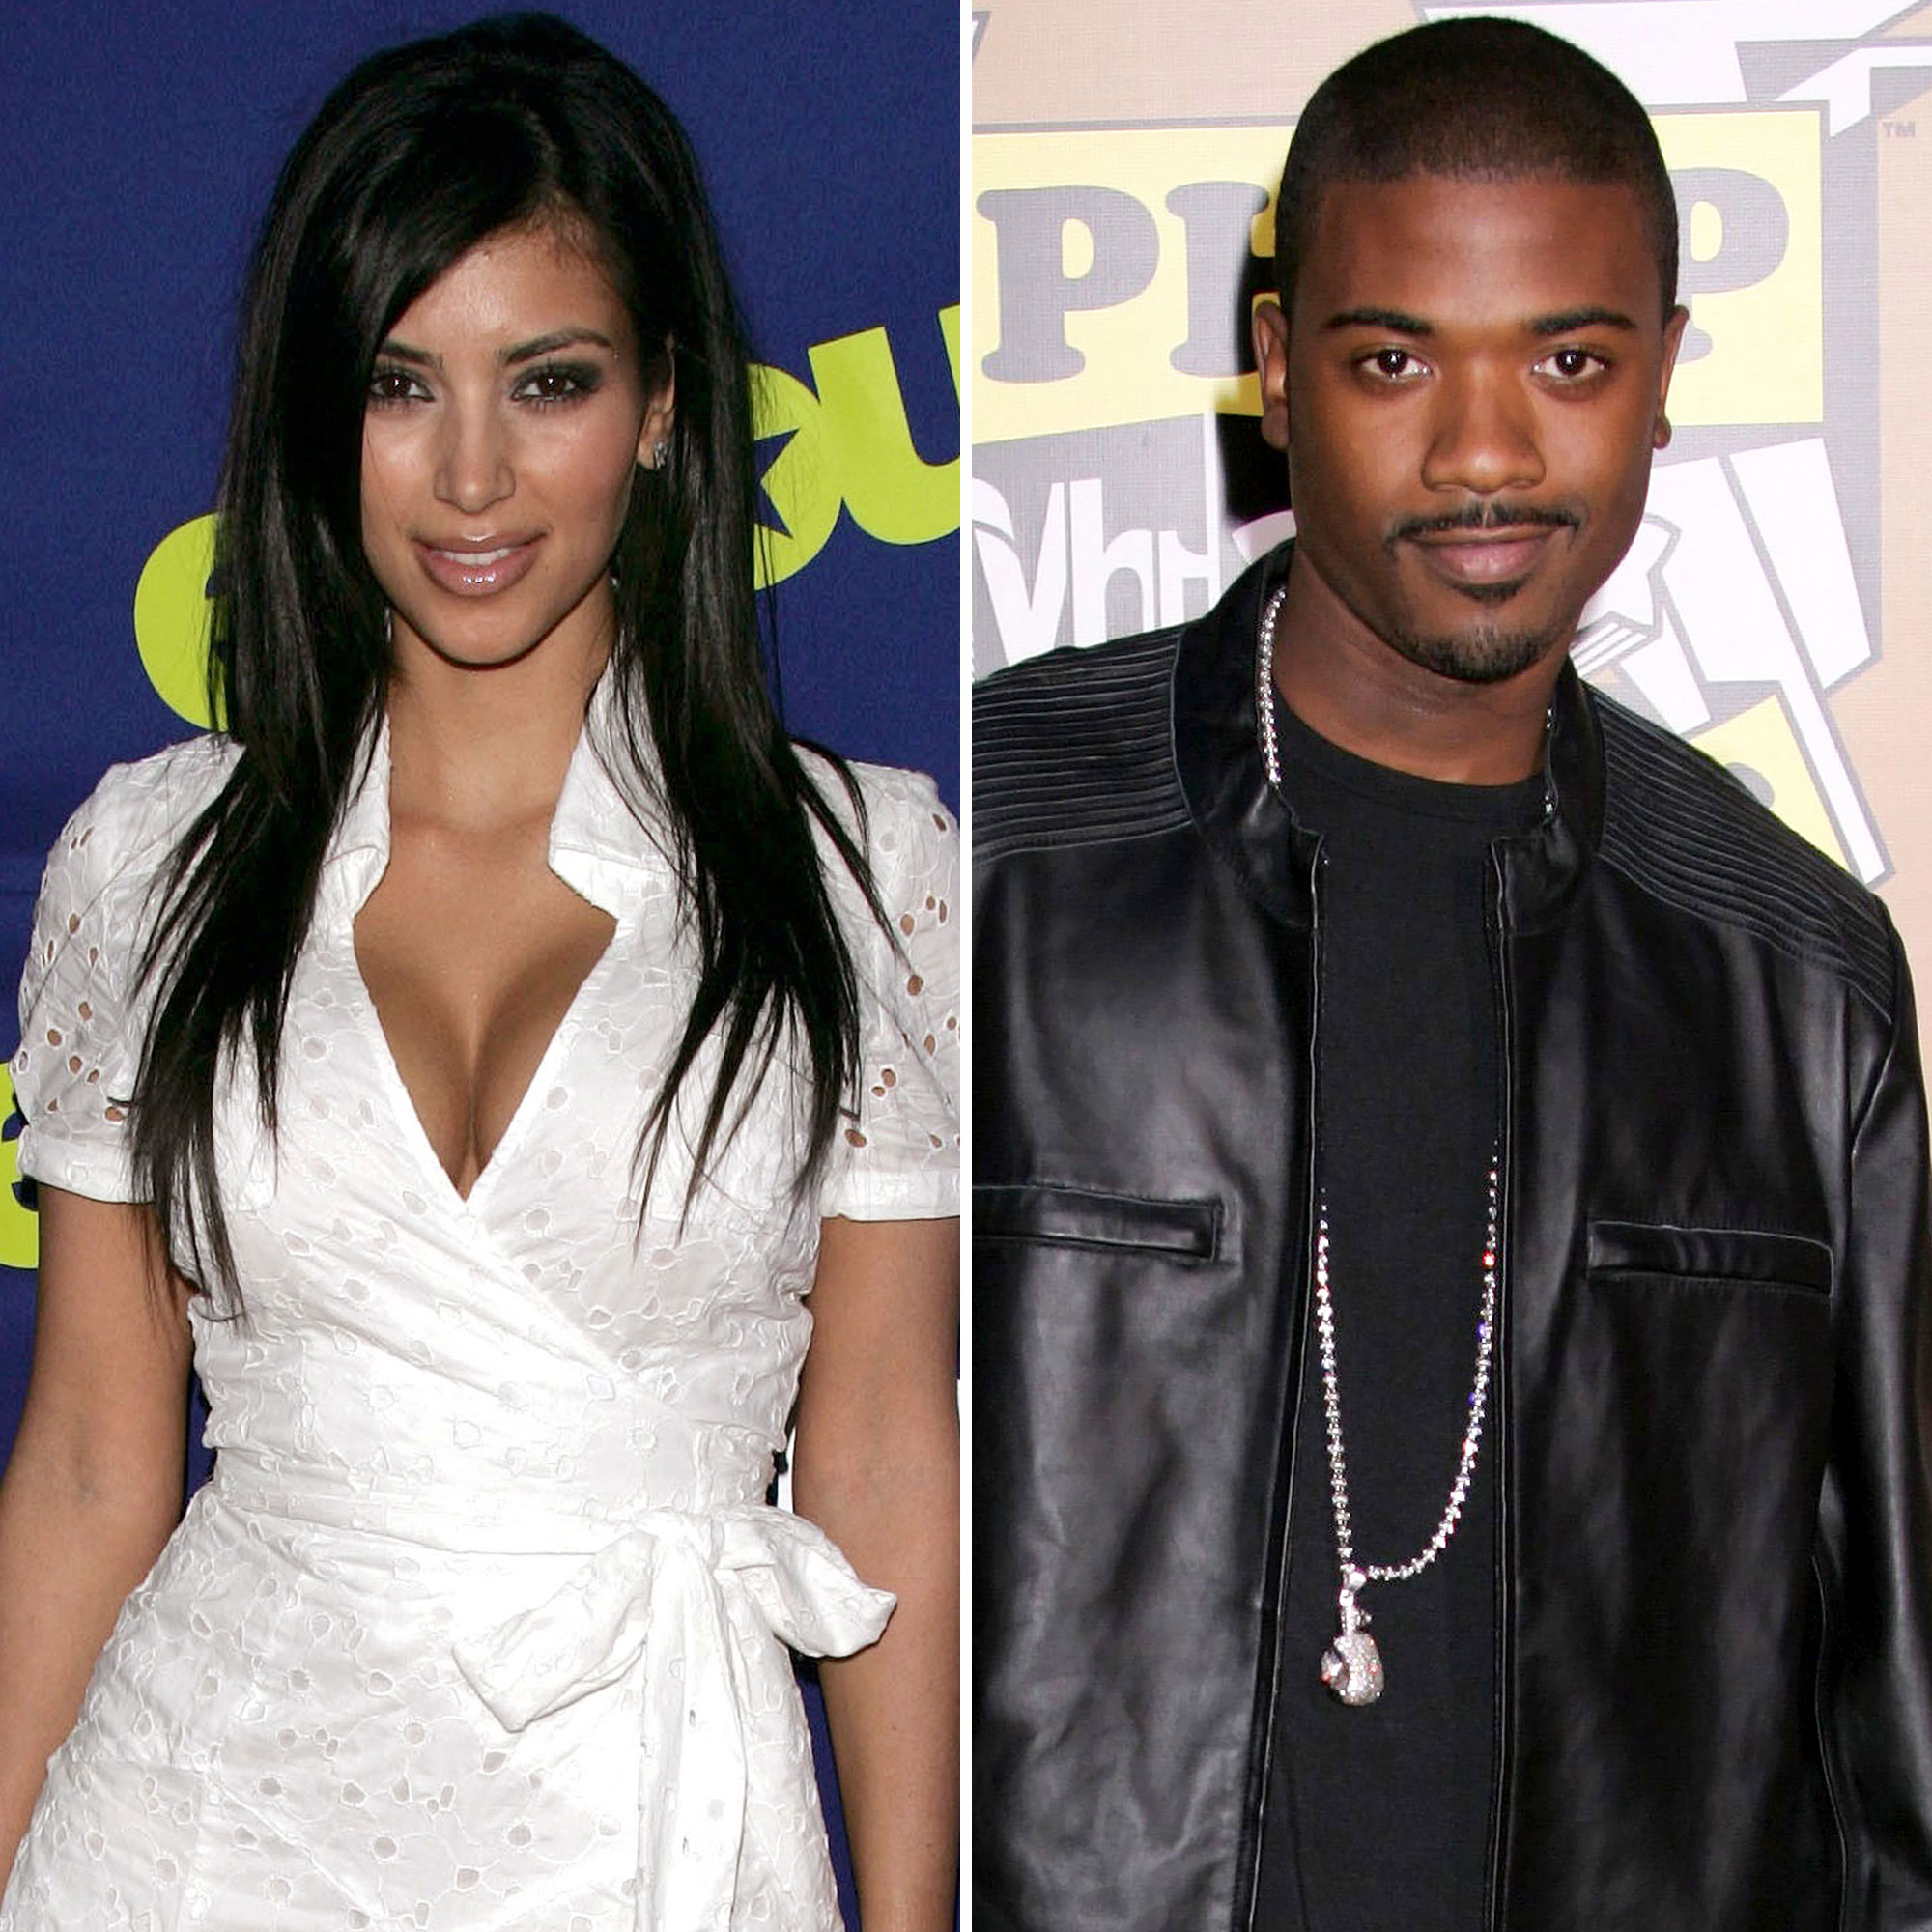 adam yax recommends kardasian and ray j pic